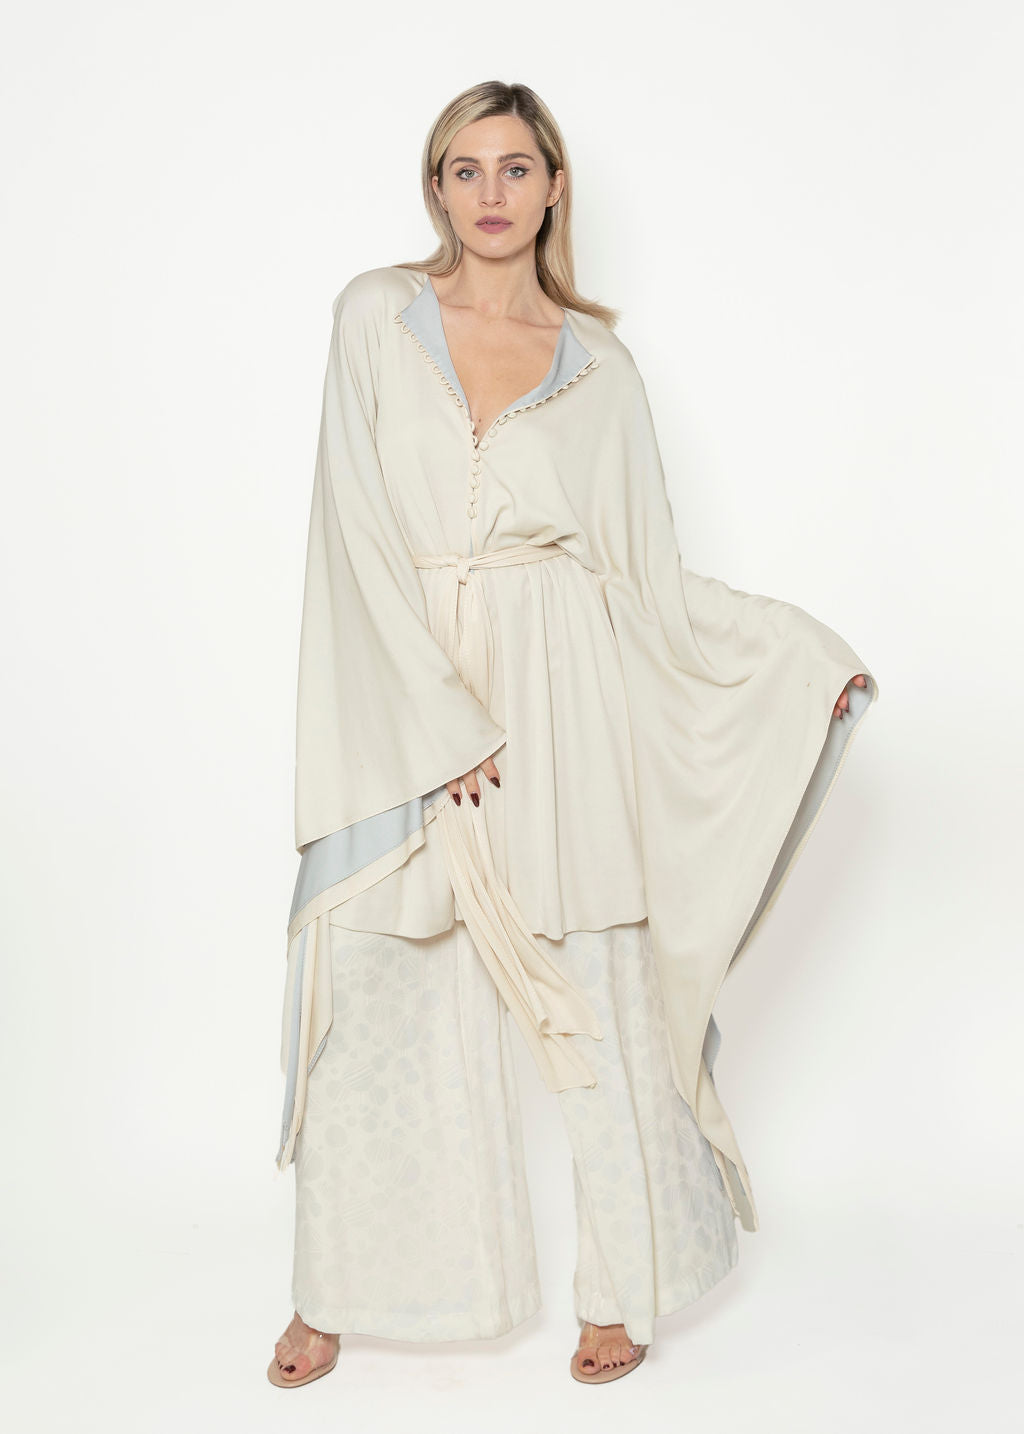 Giorgio di Sant Angelo Fall 1974 Documented Taupe Angel Sleeve Belted Dress